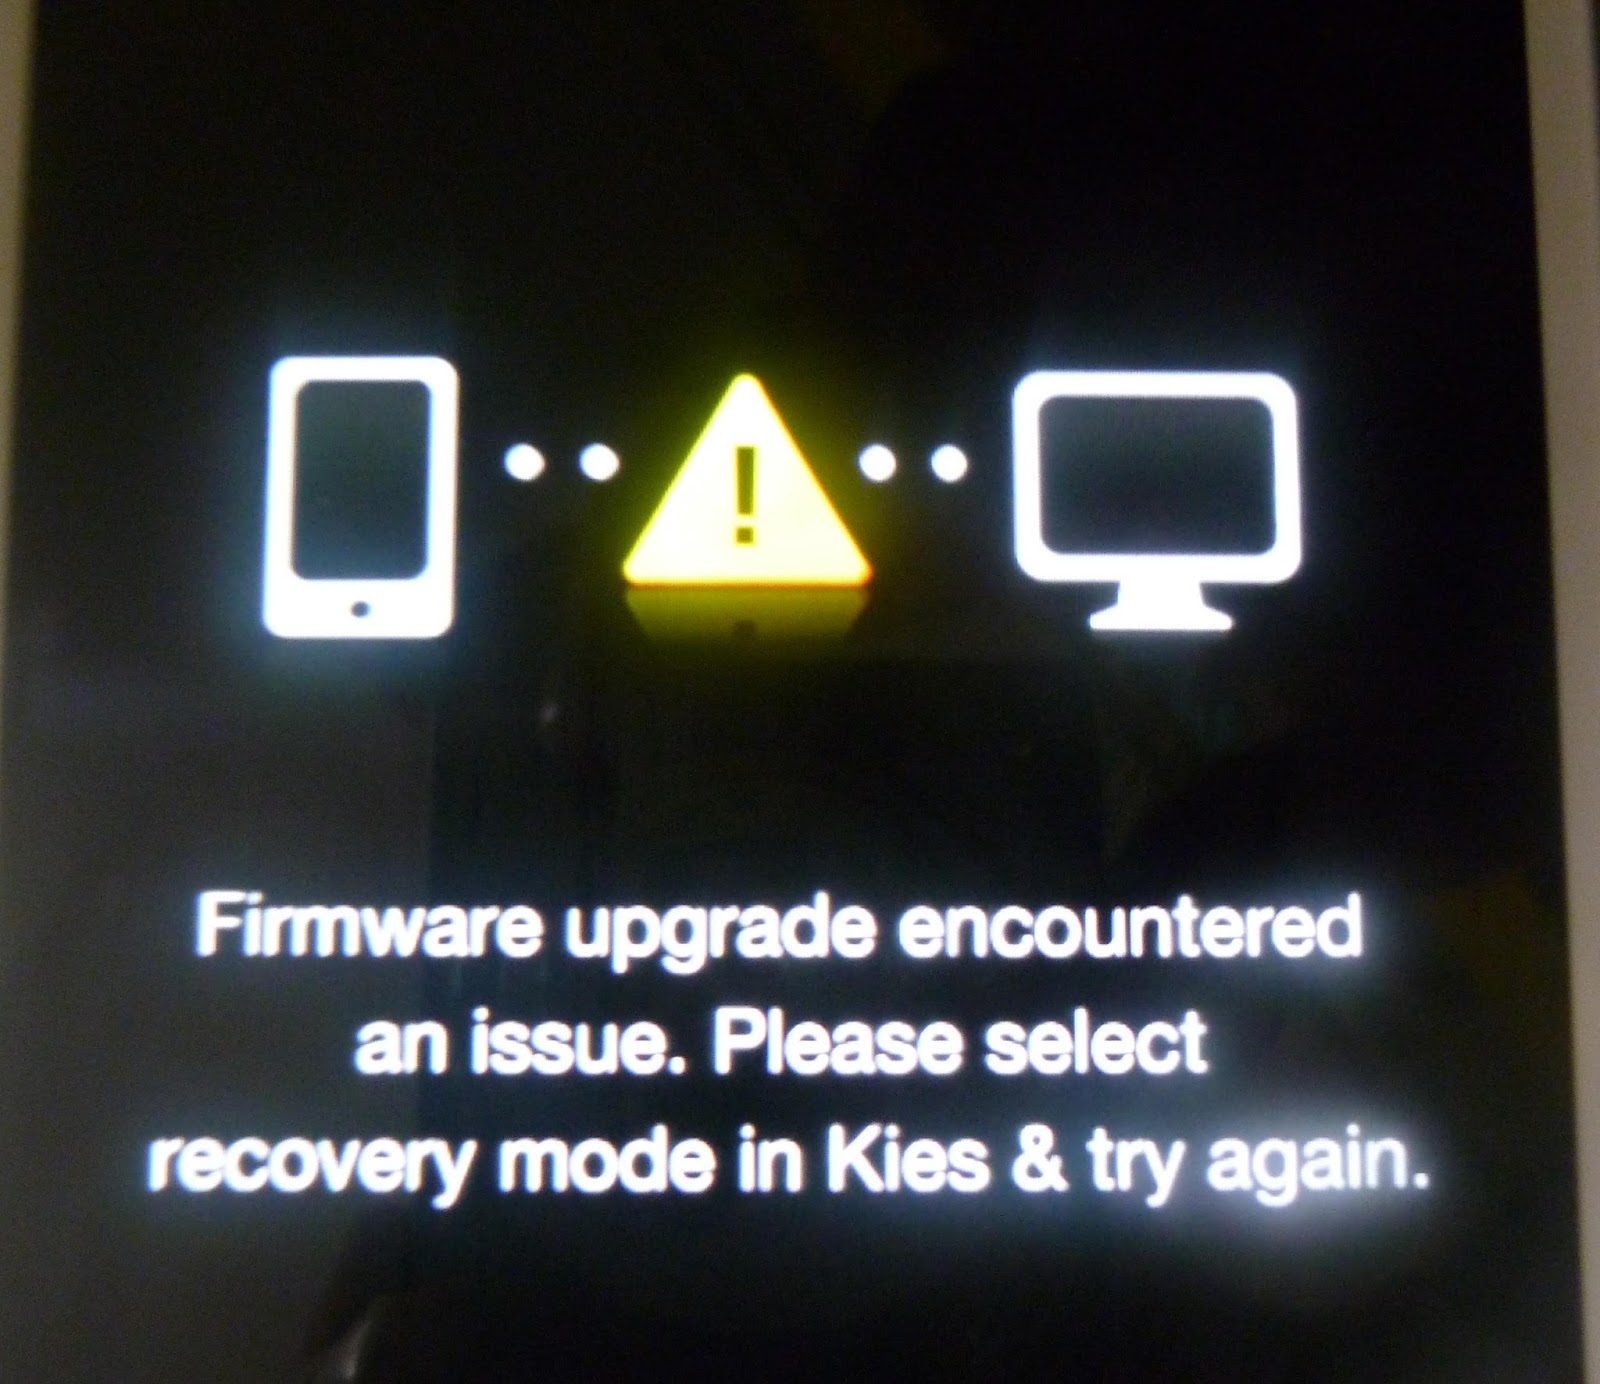 Issue encountered. Firmware upgrade encountered an Issue please select Recovery Mode in Kies try again. Recovery Mode in Kies Samsung. Планшет самсунг выдает ошибку зарядки. Черный экран и try again на андроид.